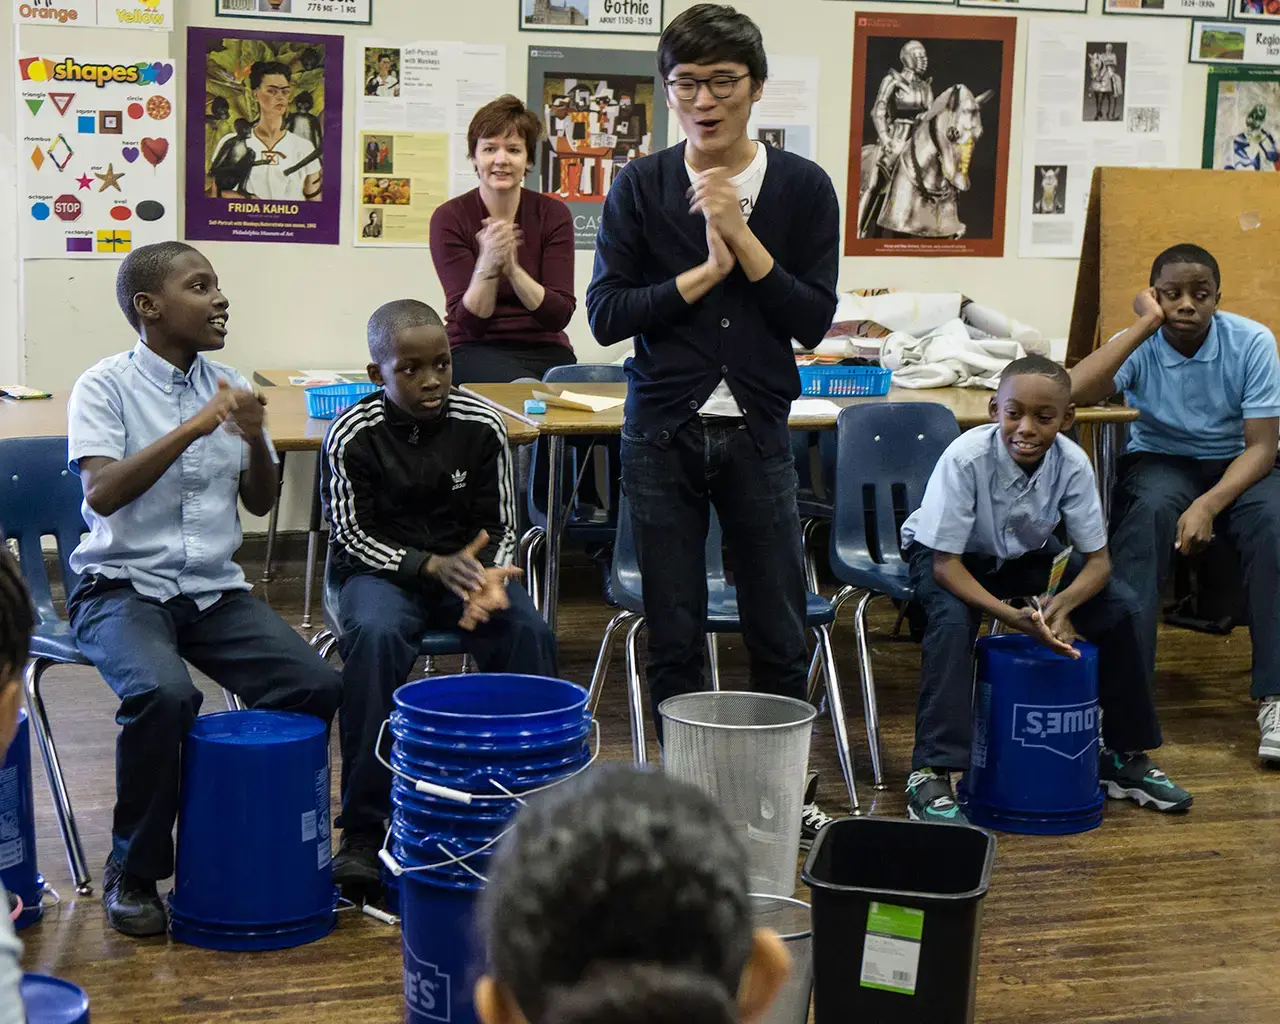 Curtis student percussionist Won Suk Lee leads his Social Entrepreneur project&mdash;training a bucket band of fifth-graders&mdash;at Philadelphia&rsquo;s Kearny Elementary School, 2014. Photo by Harris Sklar.